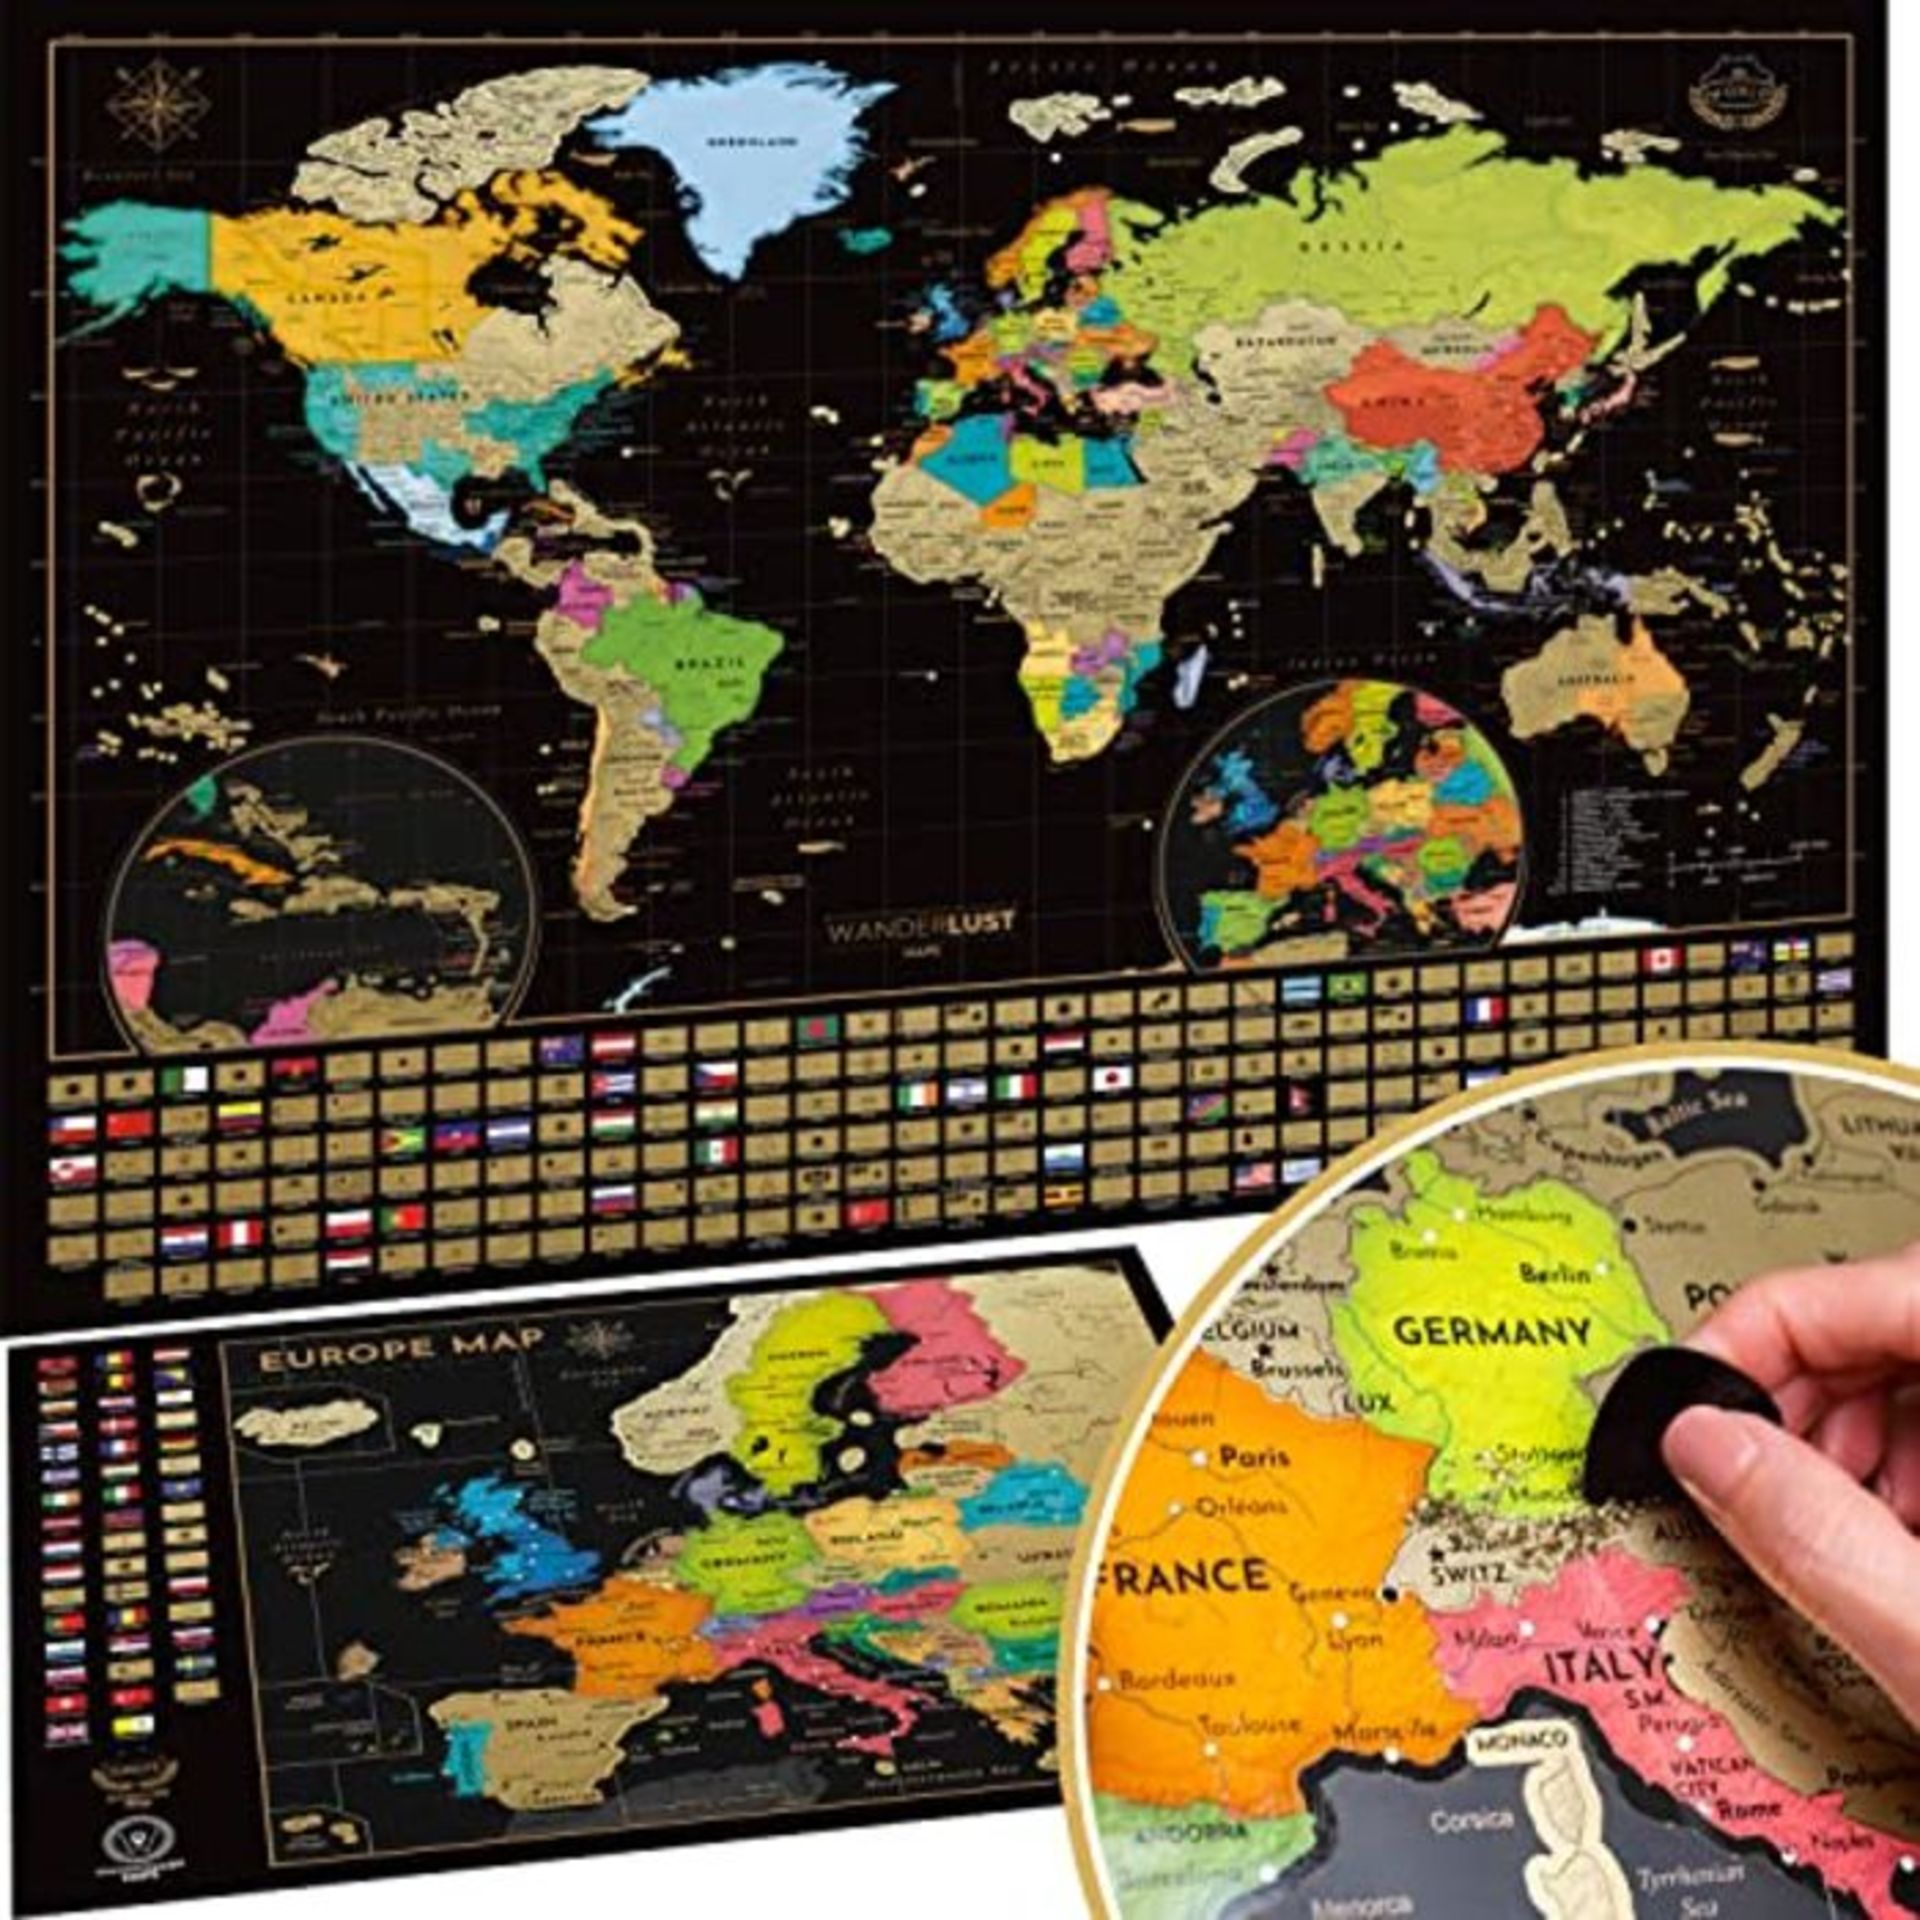 Two Scratch Off Maps - Scratch Off World Map + Europe Map - Deluxe Scratch-Off Interna